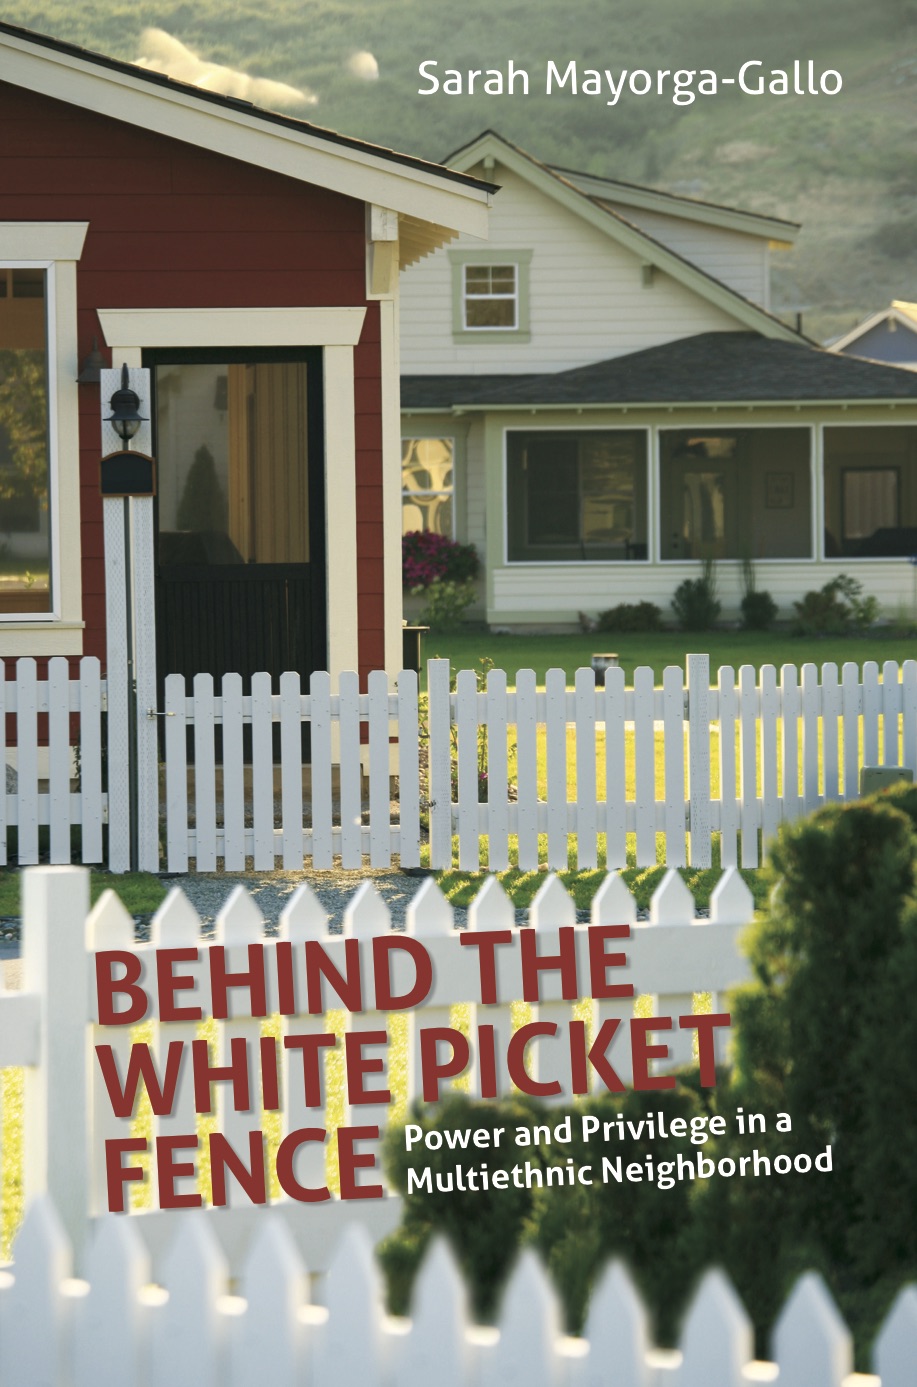 Beyond the White Picket Fence Book Cover, red house in background with white picket fence in forefront